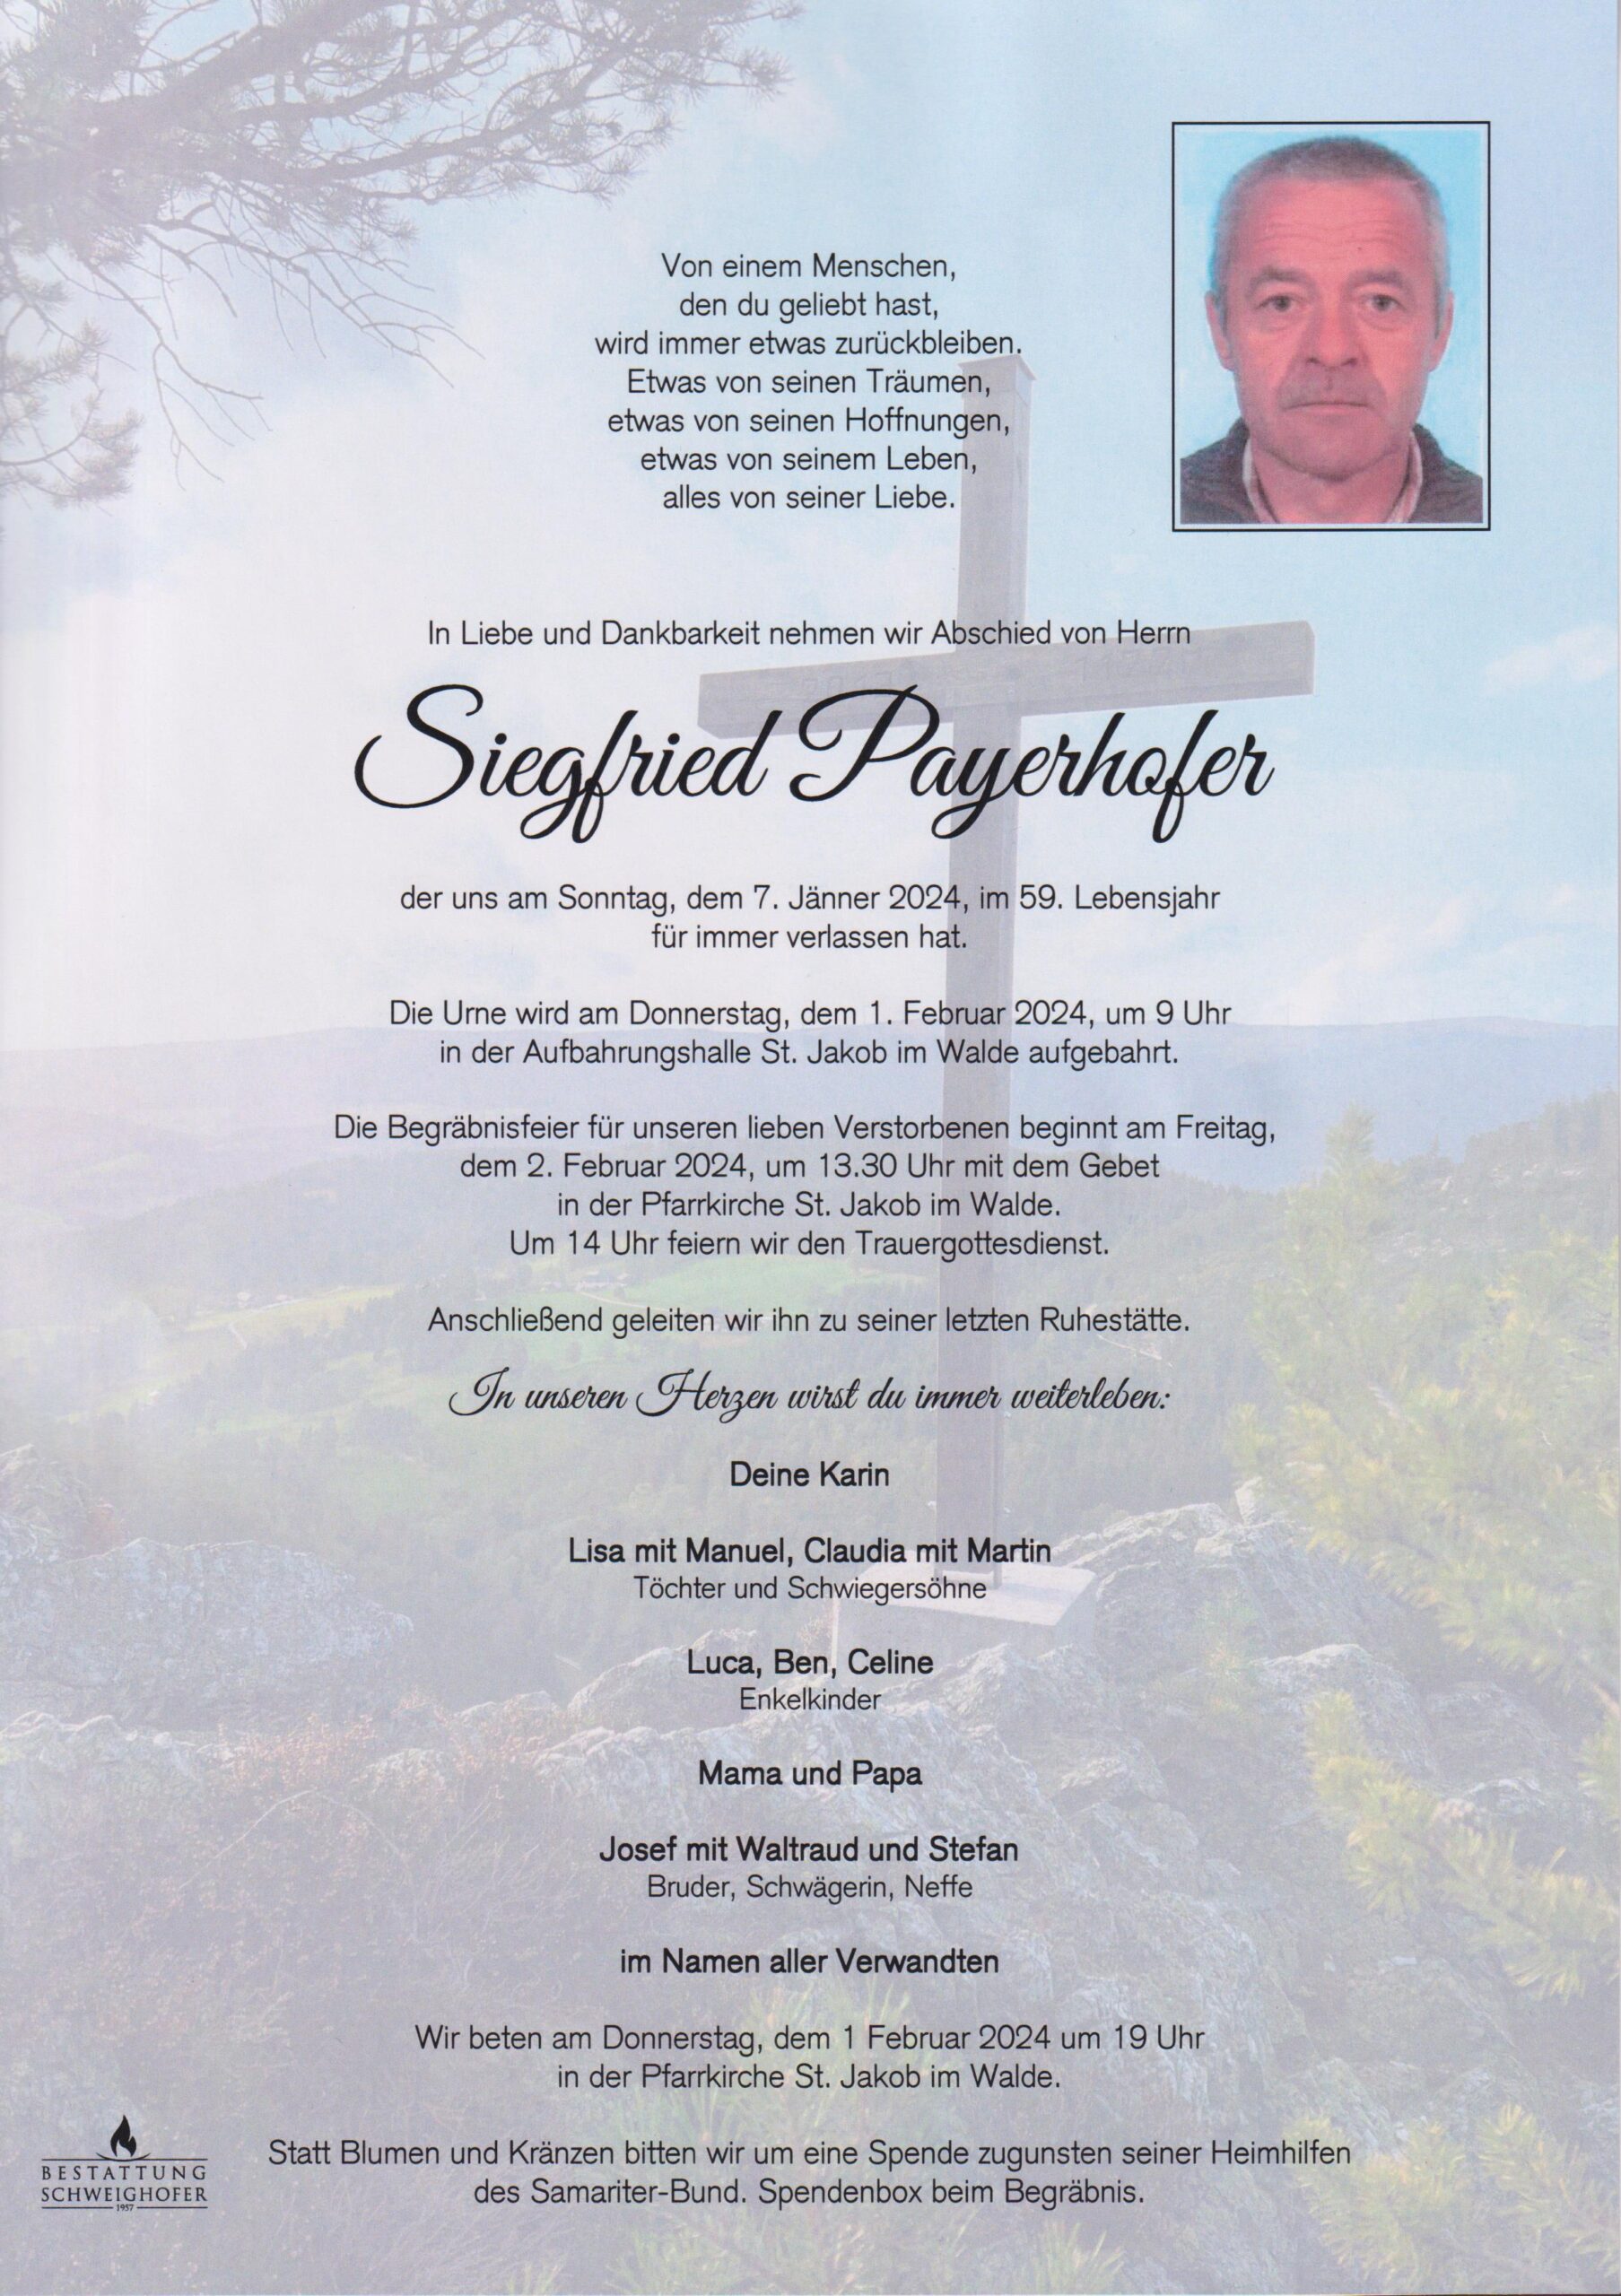 You are currently viewing Siegfried Payerhofer